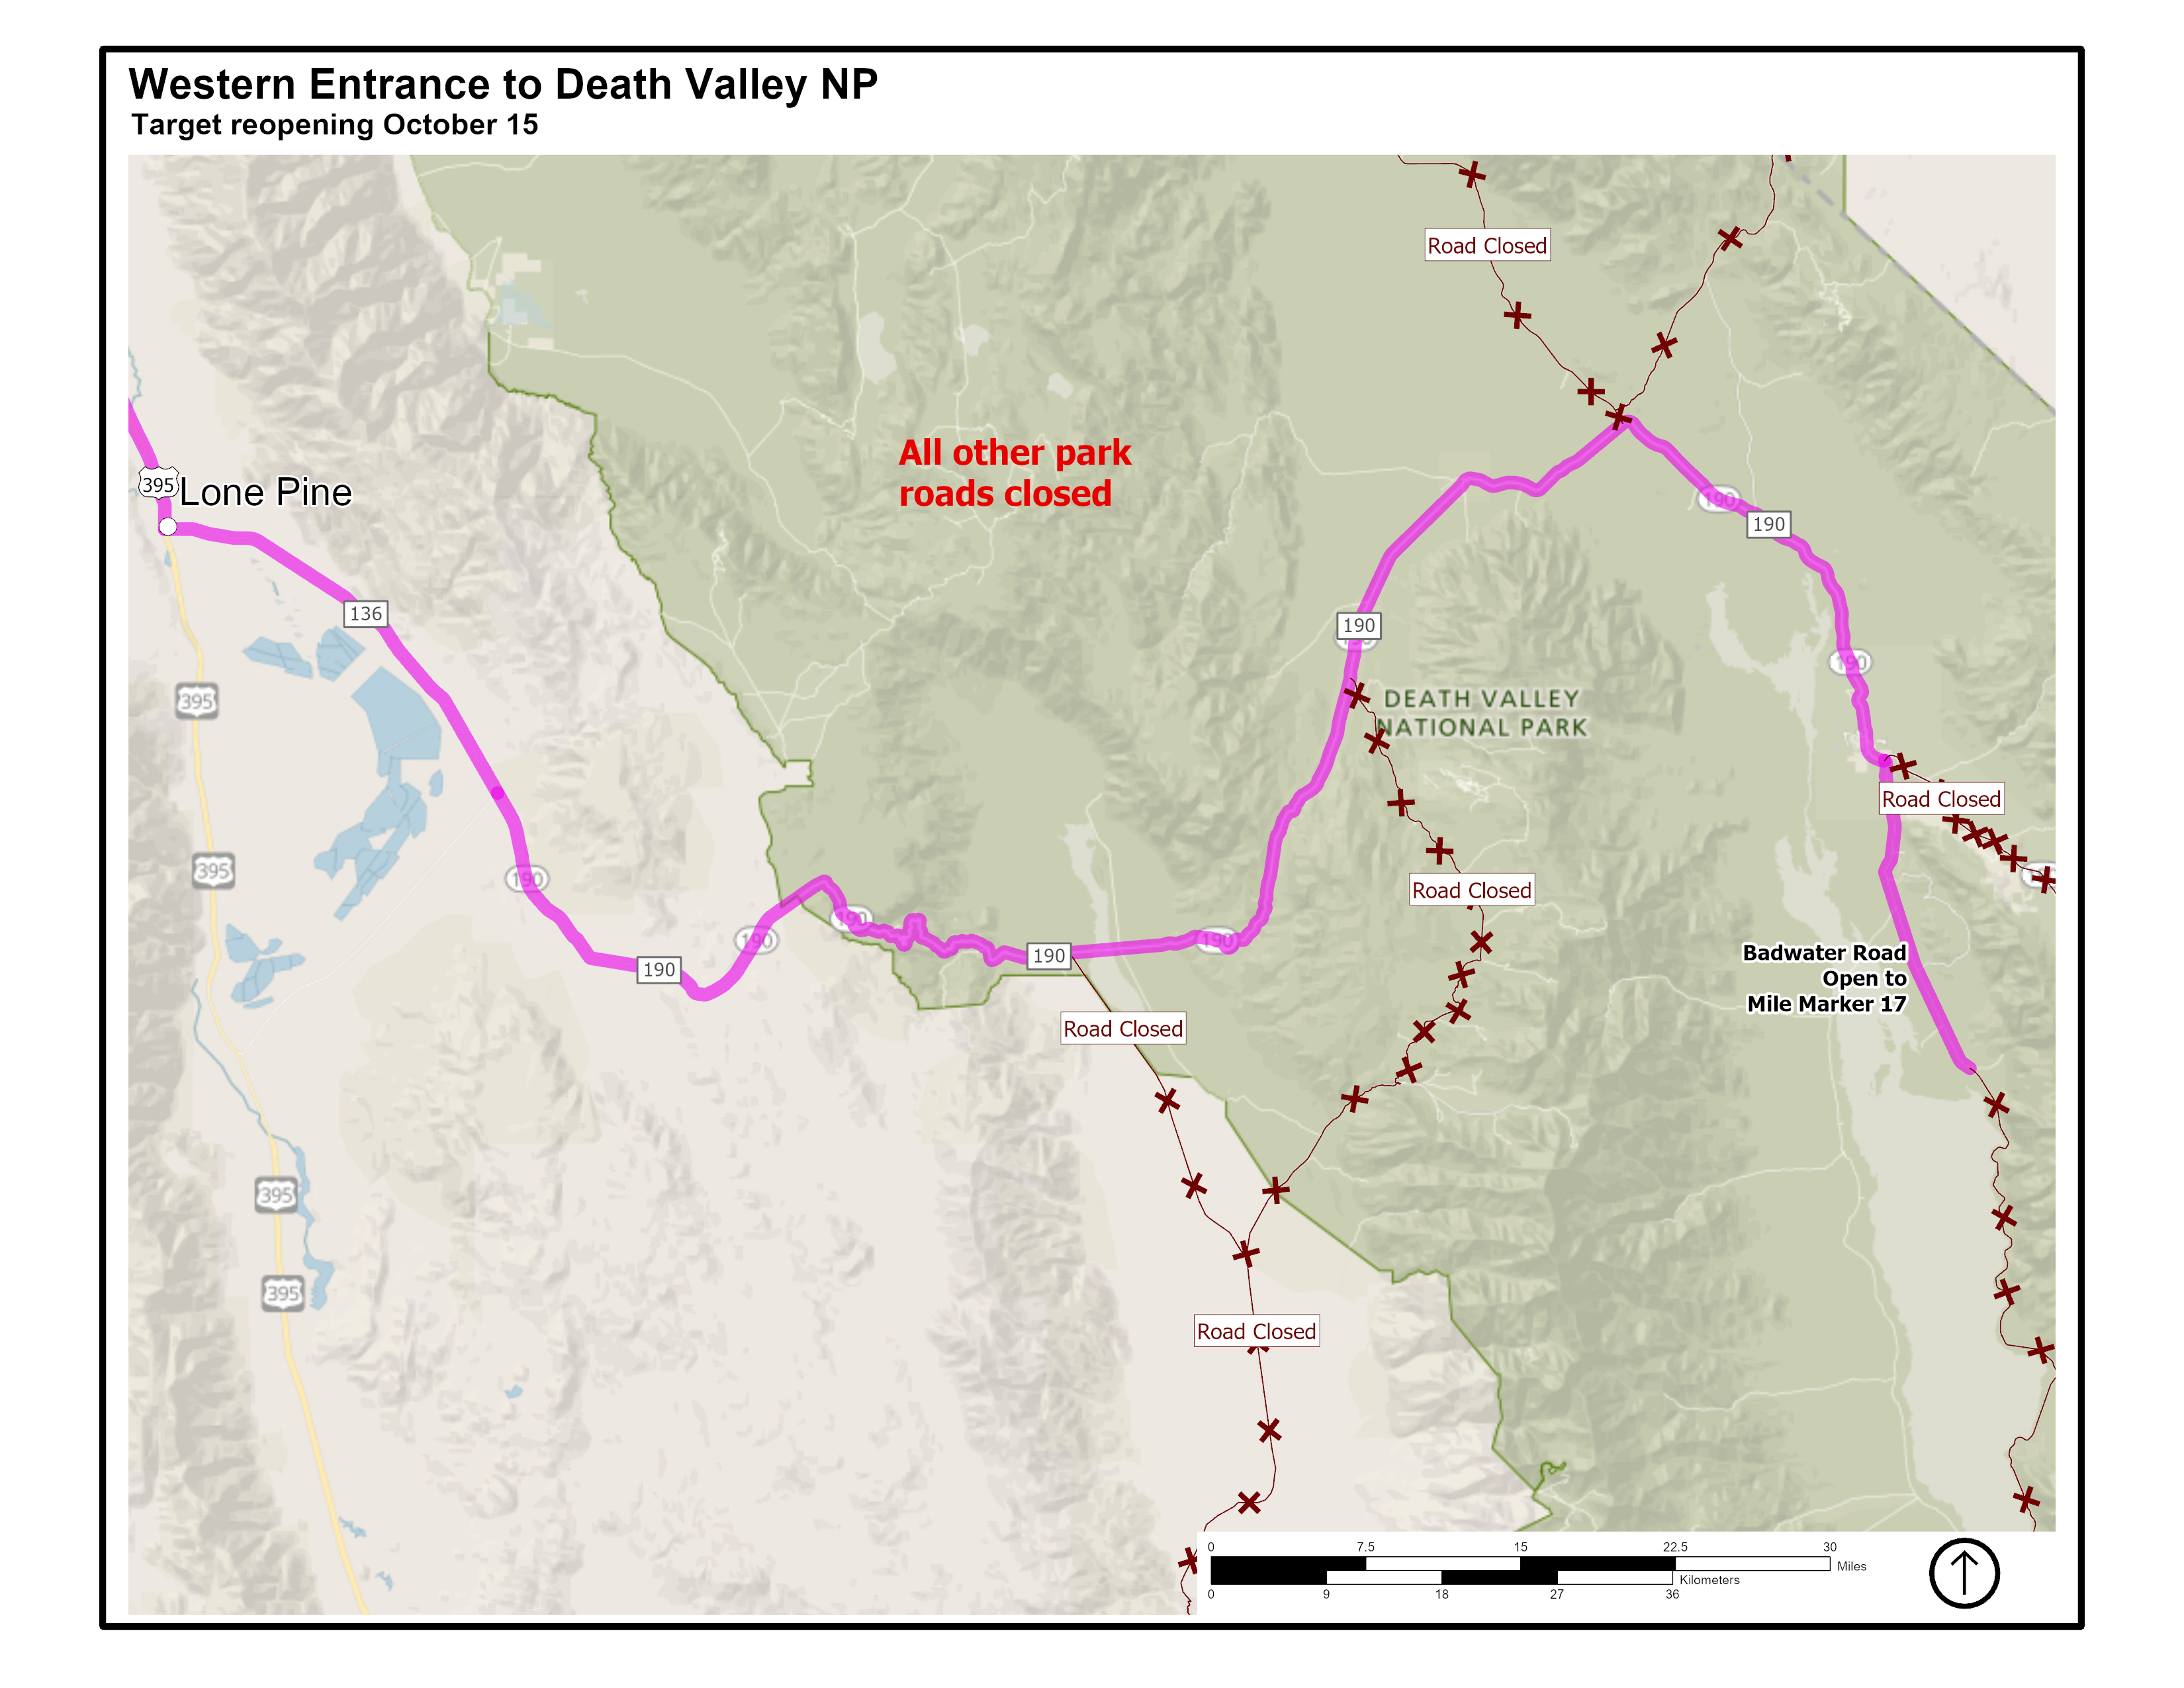 A map highlighting the west entrance into Death Valley via Lone Pine from HWY 395 to HWY 136 to HWY 190.